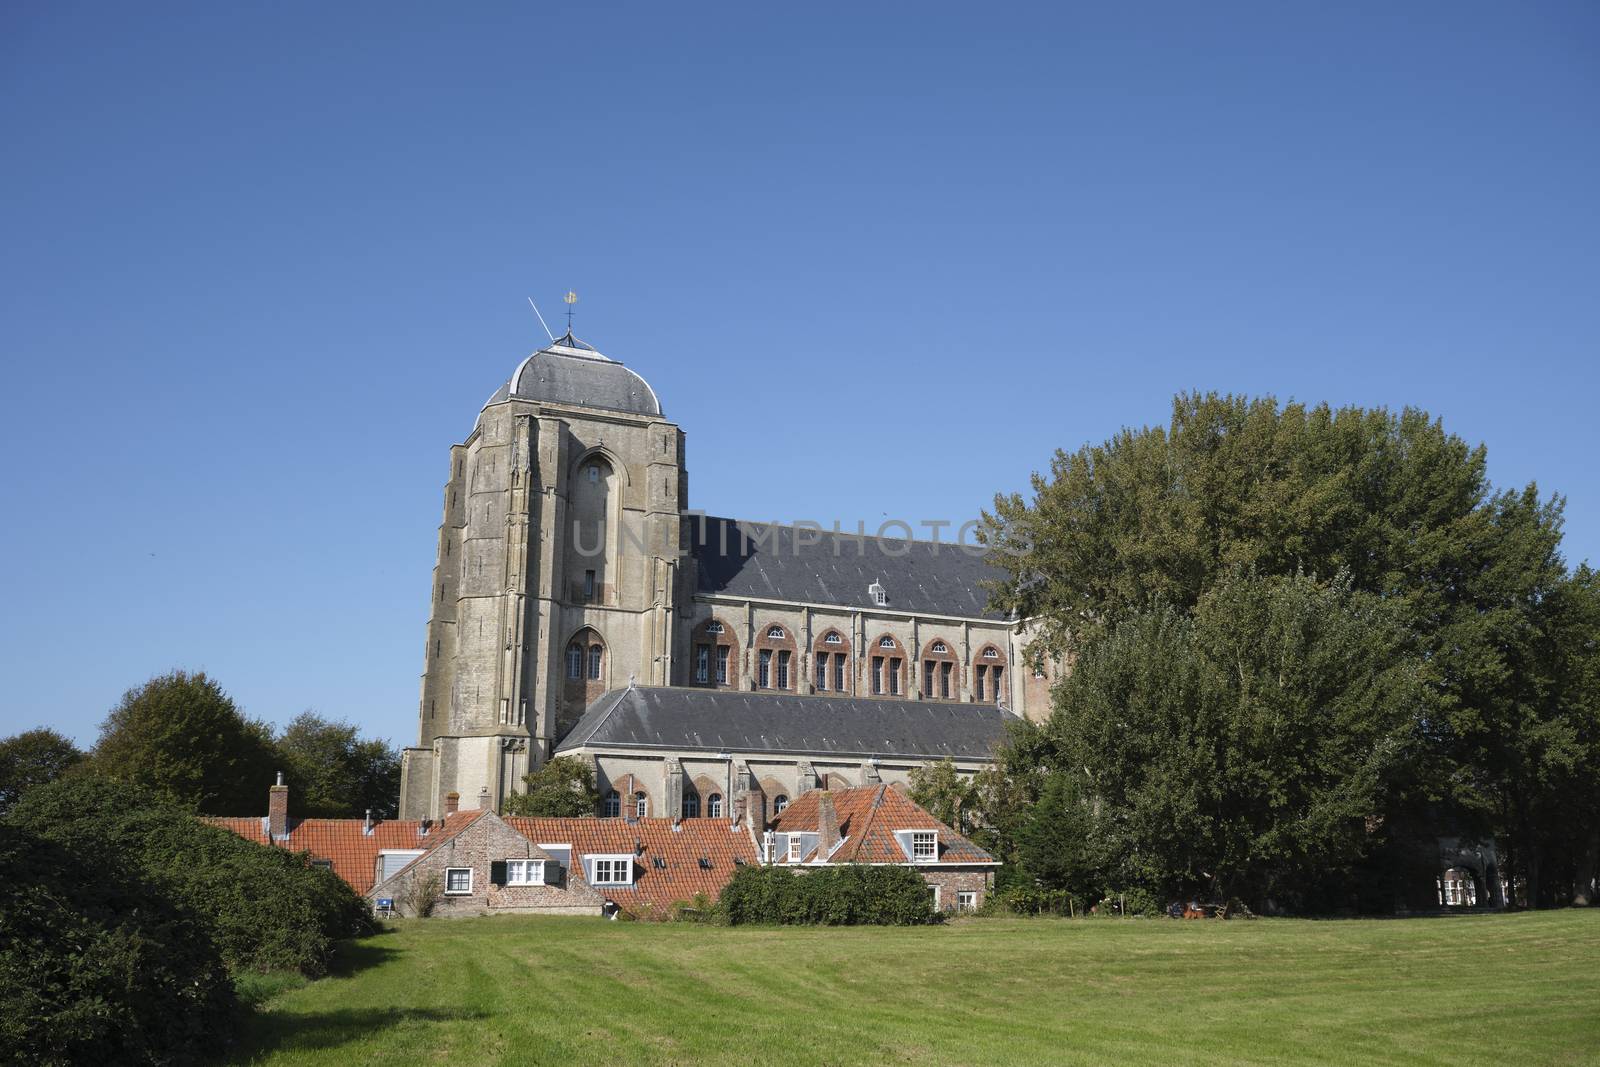 Grote Kerk or Church in the city of Veere, The Netherlands.